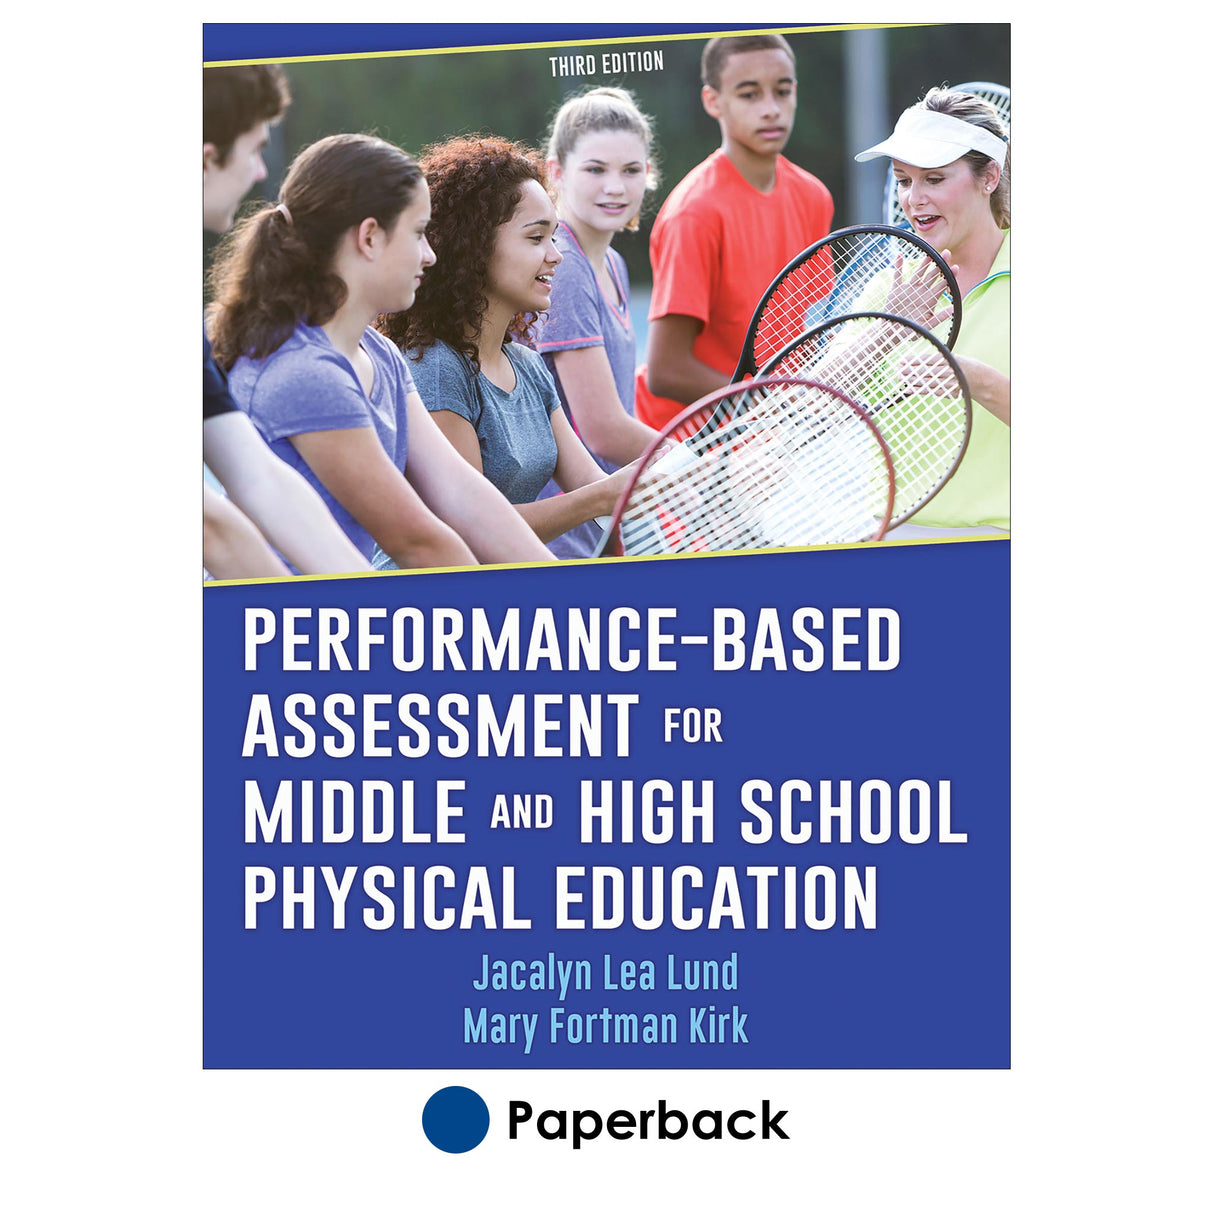 Performance-Based Assessment for Middle and High School Physical Education-3rd Edition